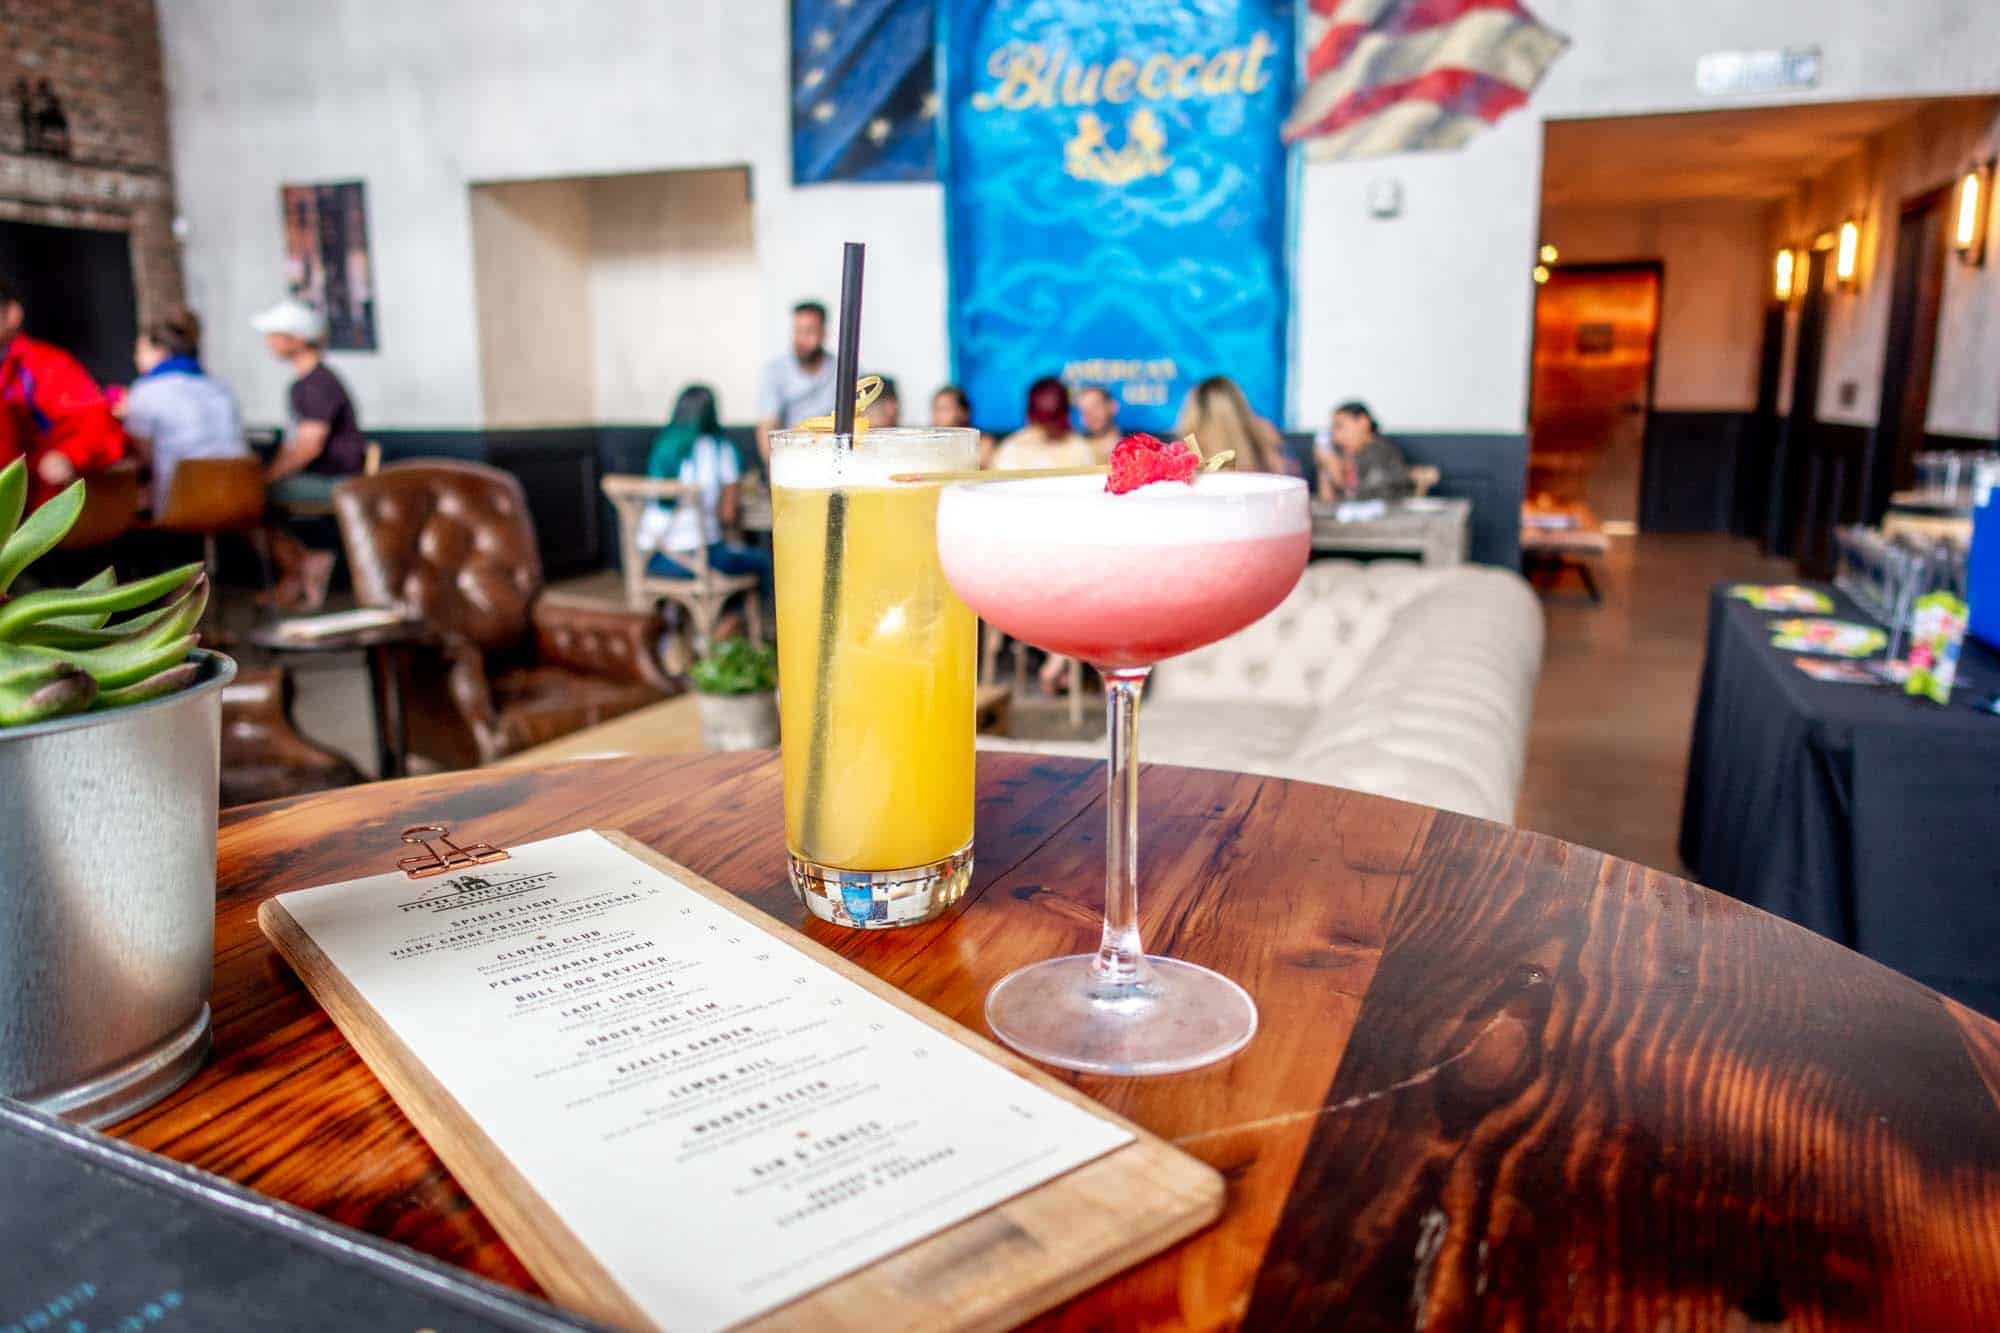 Two cocktails and a menu on a table in front of a mural showing a bottle of Bluecoat gin